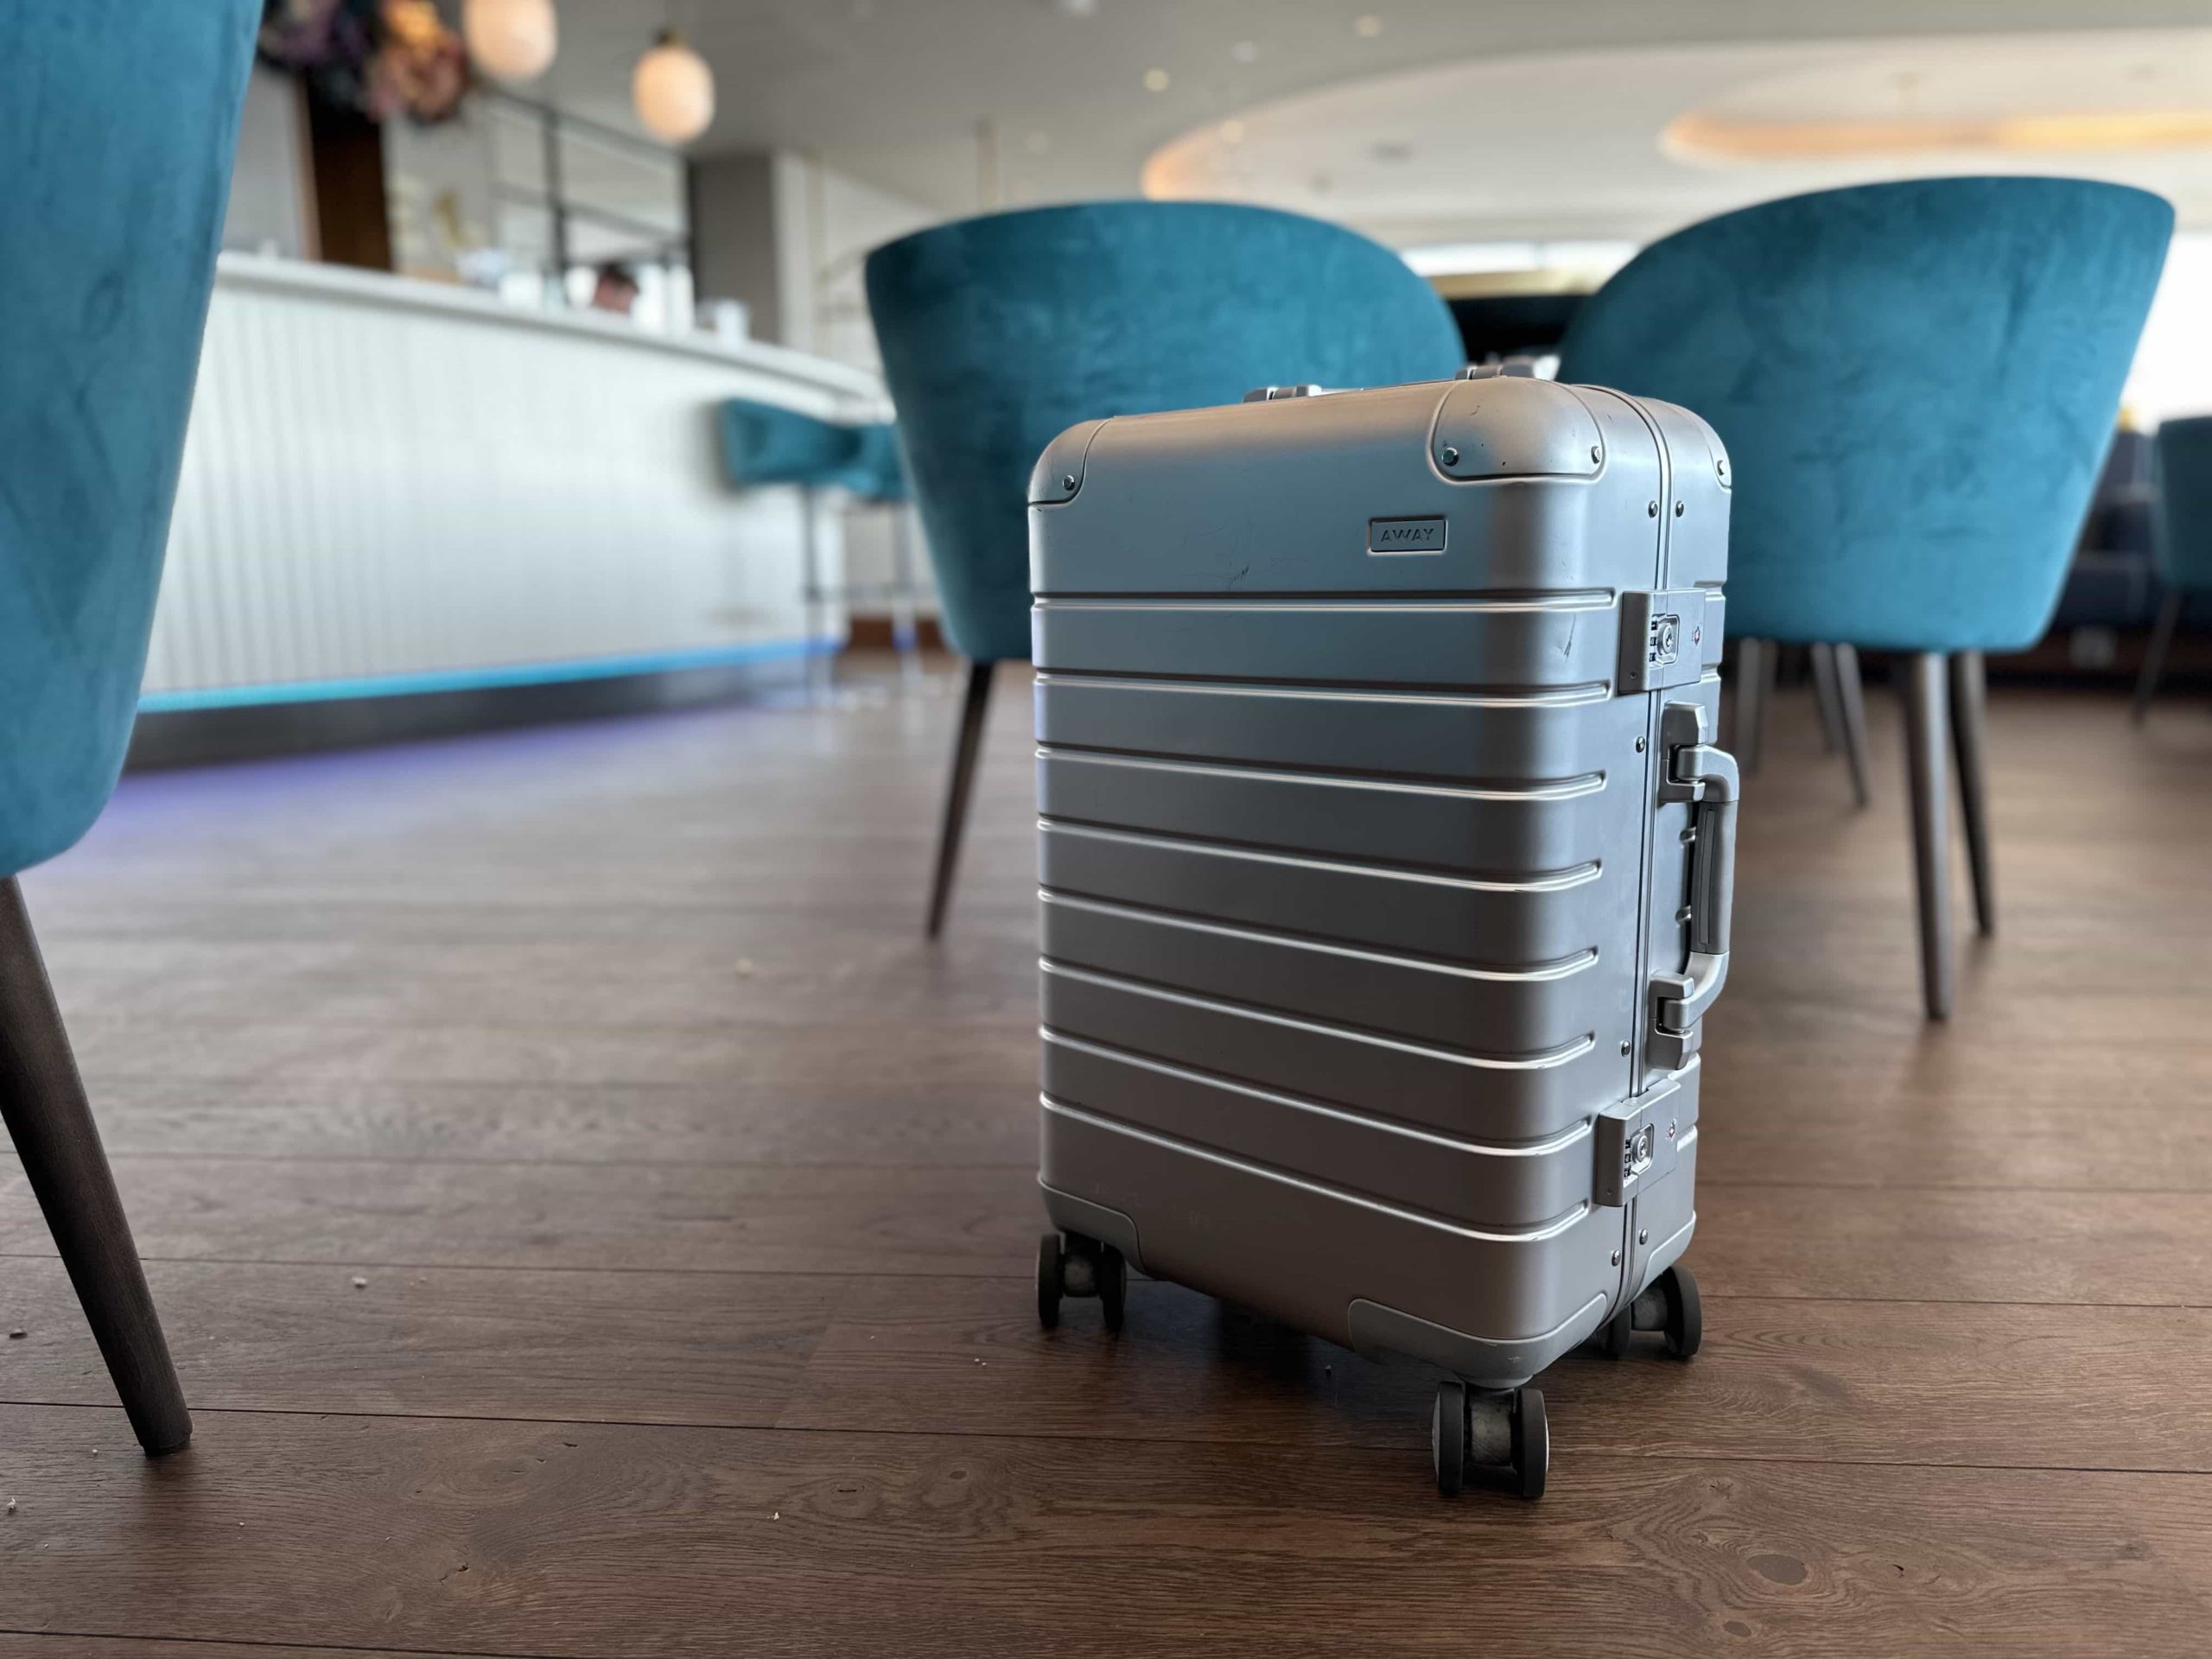 A suitcase in the middle of a dining area in an airport lounge